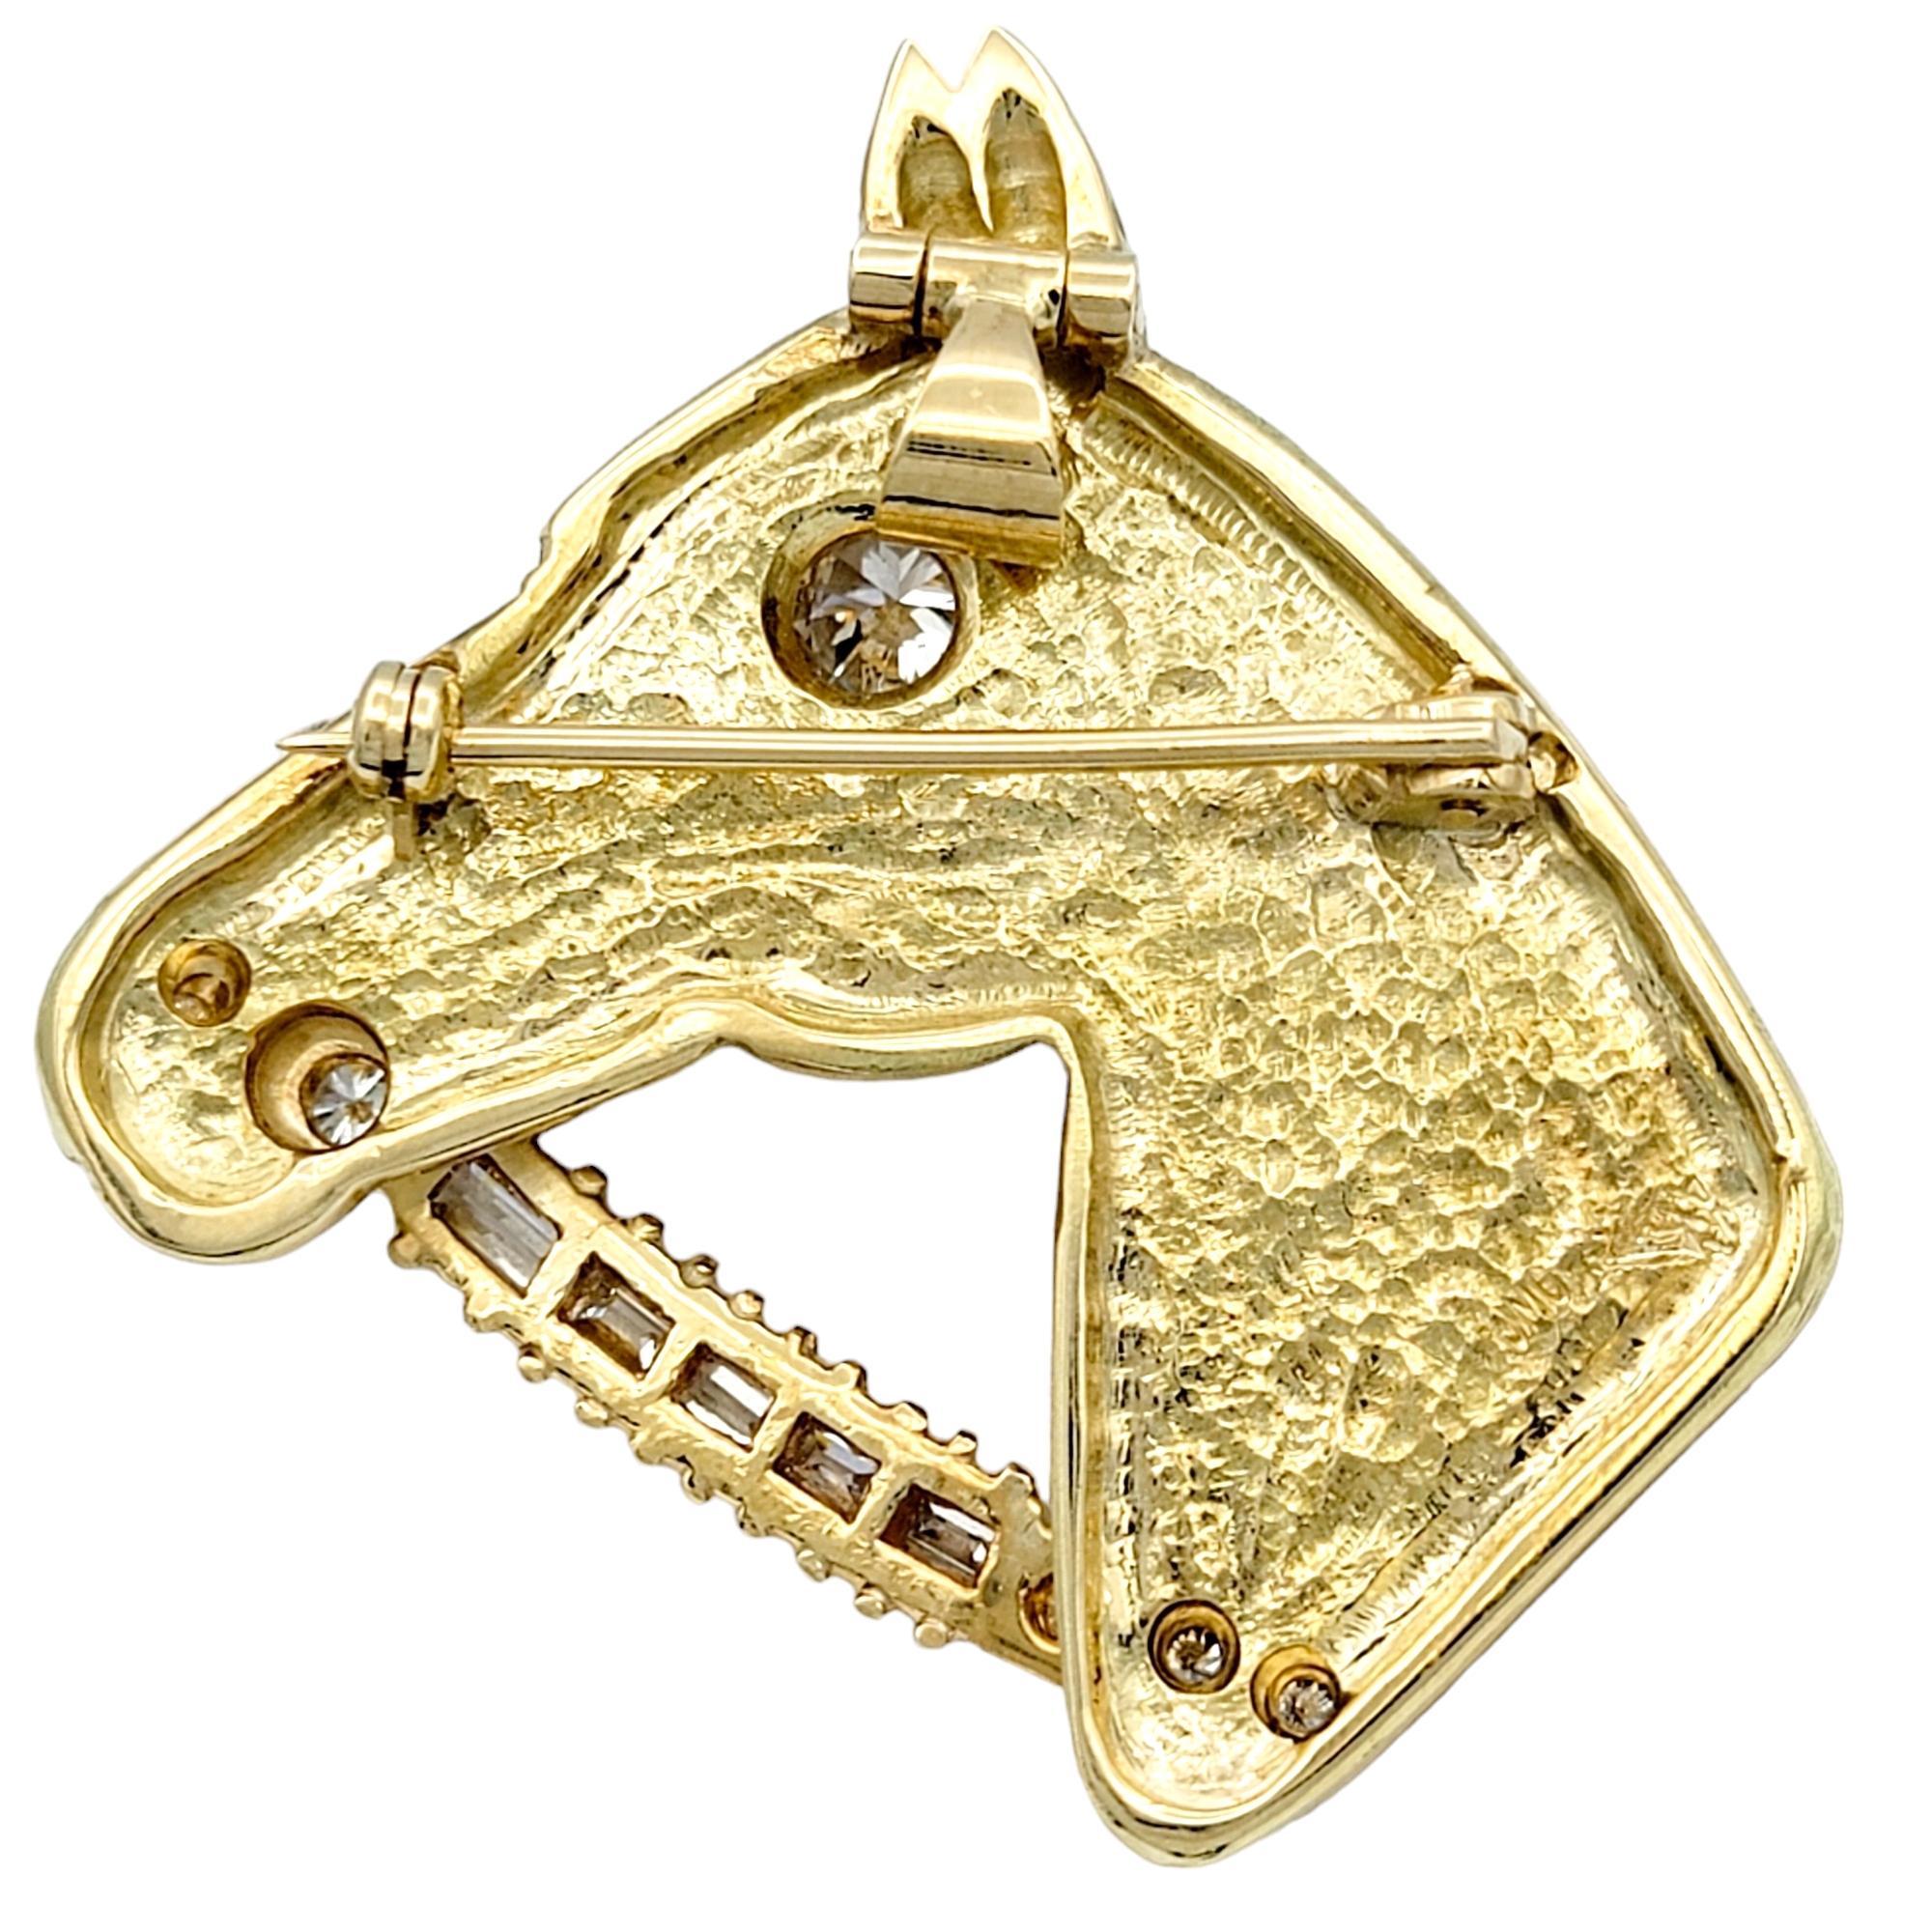 This exquisite equestrian themed piece, crafted from 14 karat yellow gold, elegantly showcases a wonderfully detailed horse head profile. Beautifully glistening as the steed's discerning eye is a single round brilliant-cut diamond, lending a